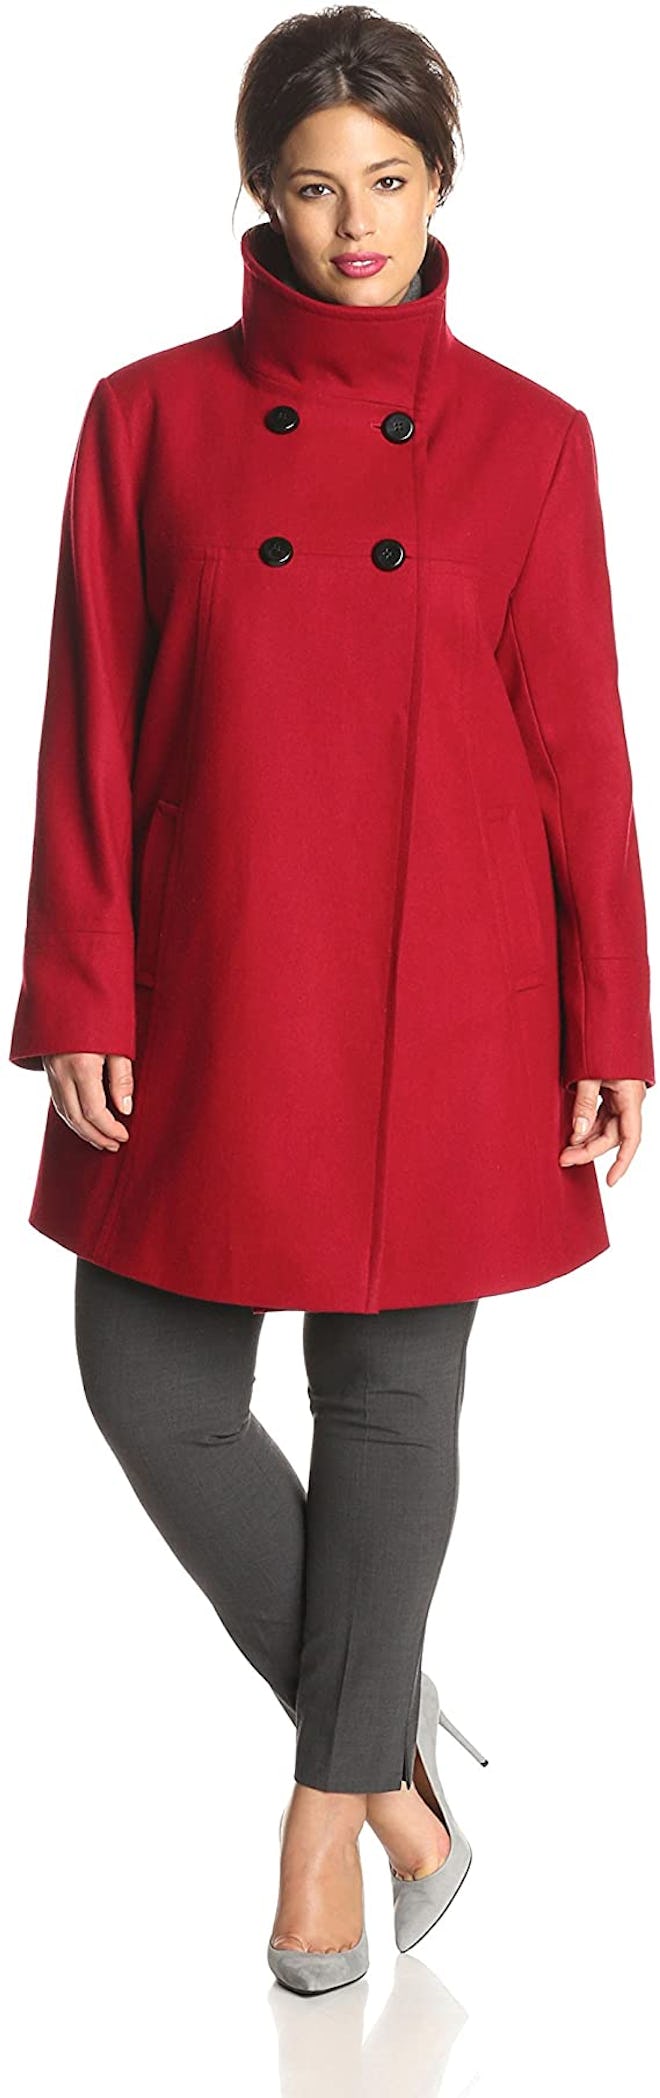 Larry Levine Plus-Size Double-Breasted Wool-Blend Coat